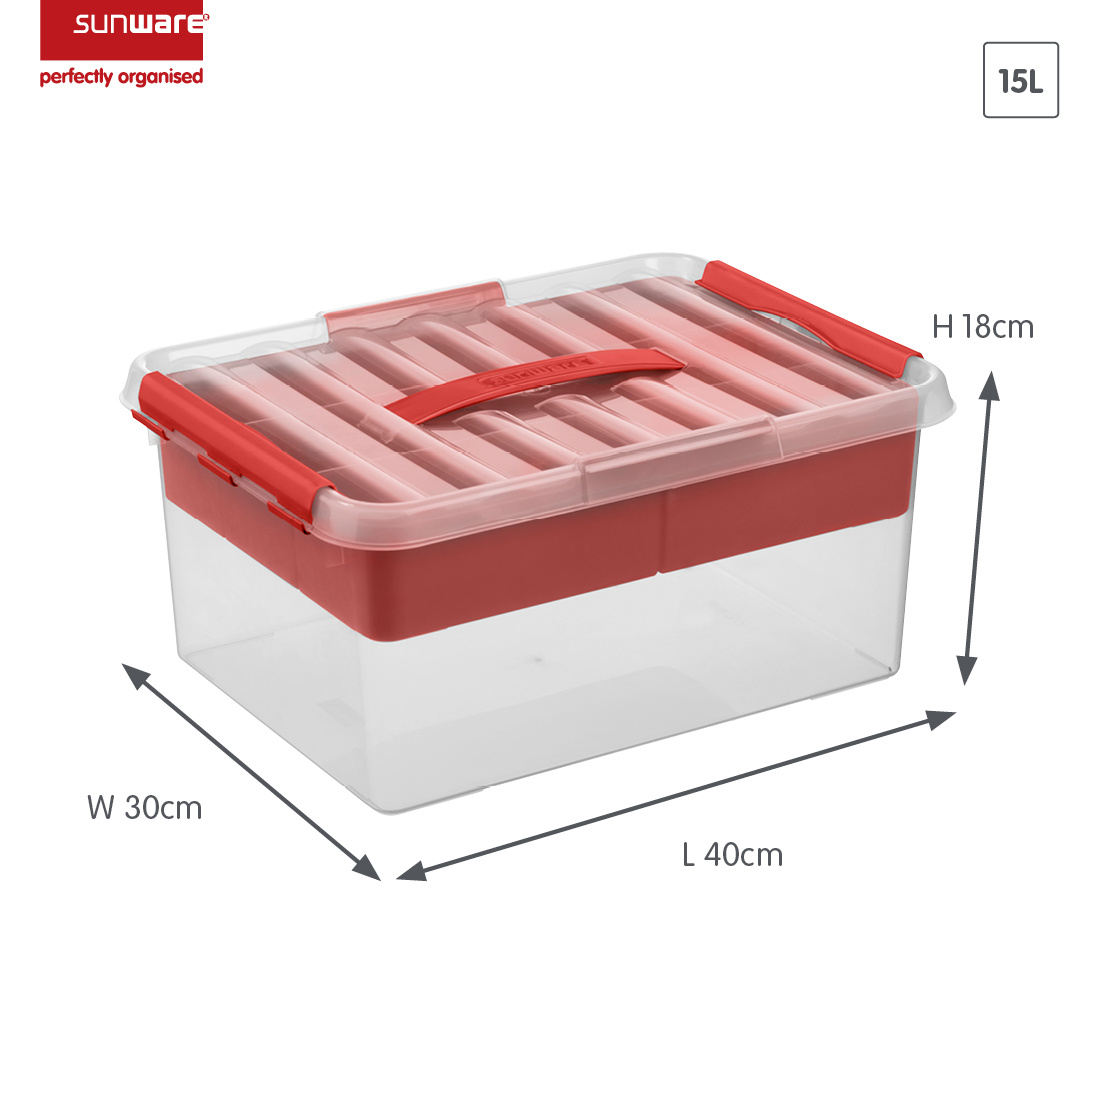 Q-line storage box with tray 15L transparent red